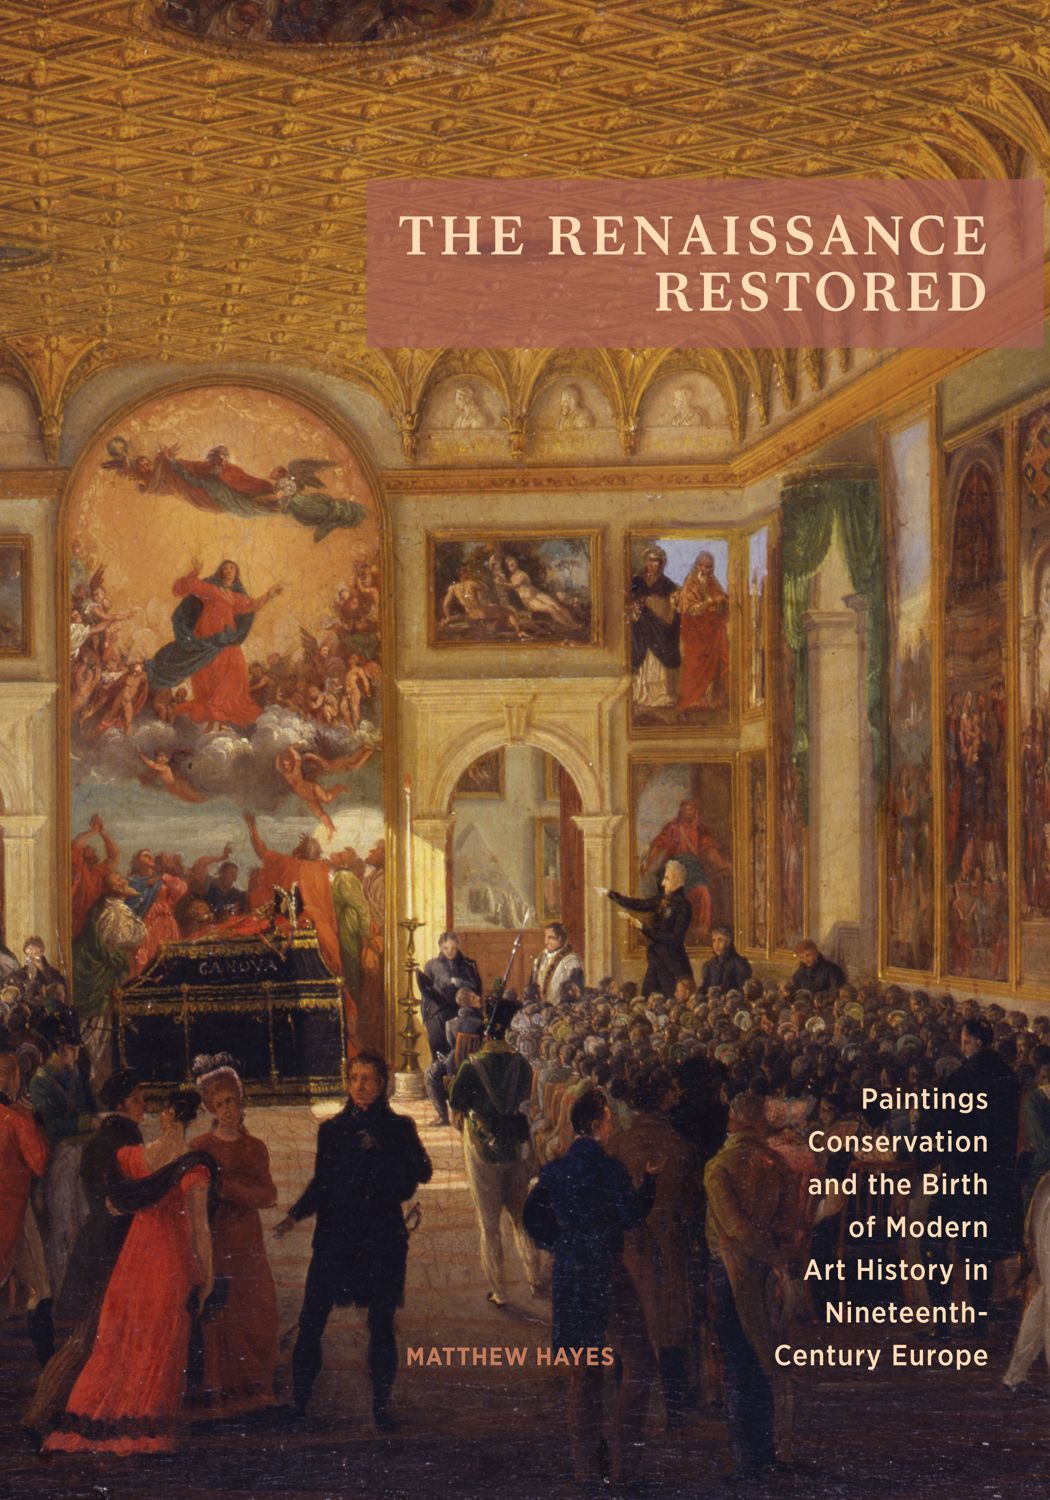 Book cover for The Renaissance Restored, courtesy of The Getty Conservation Institute